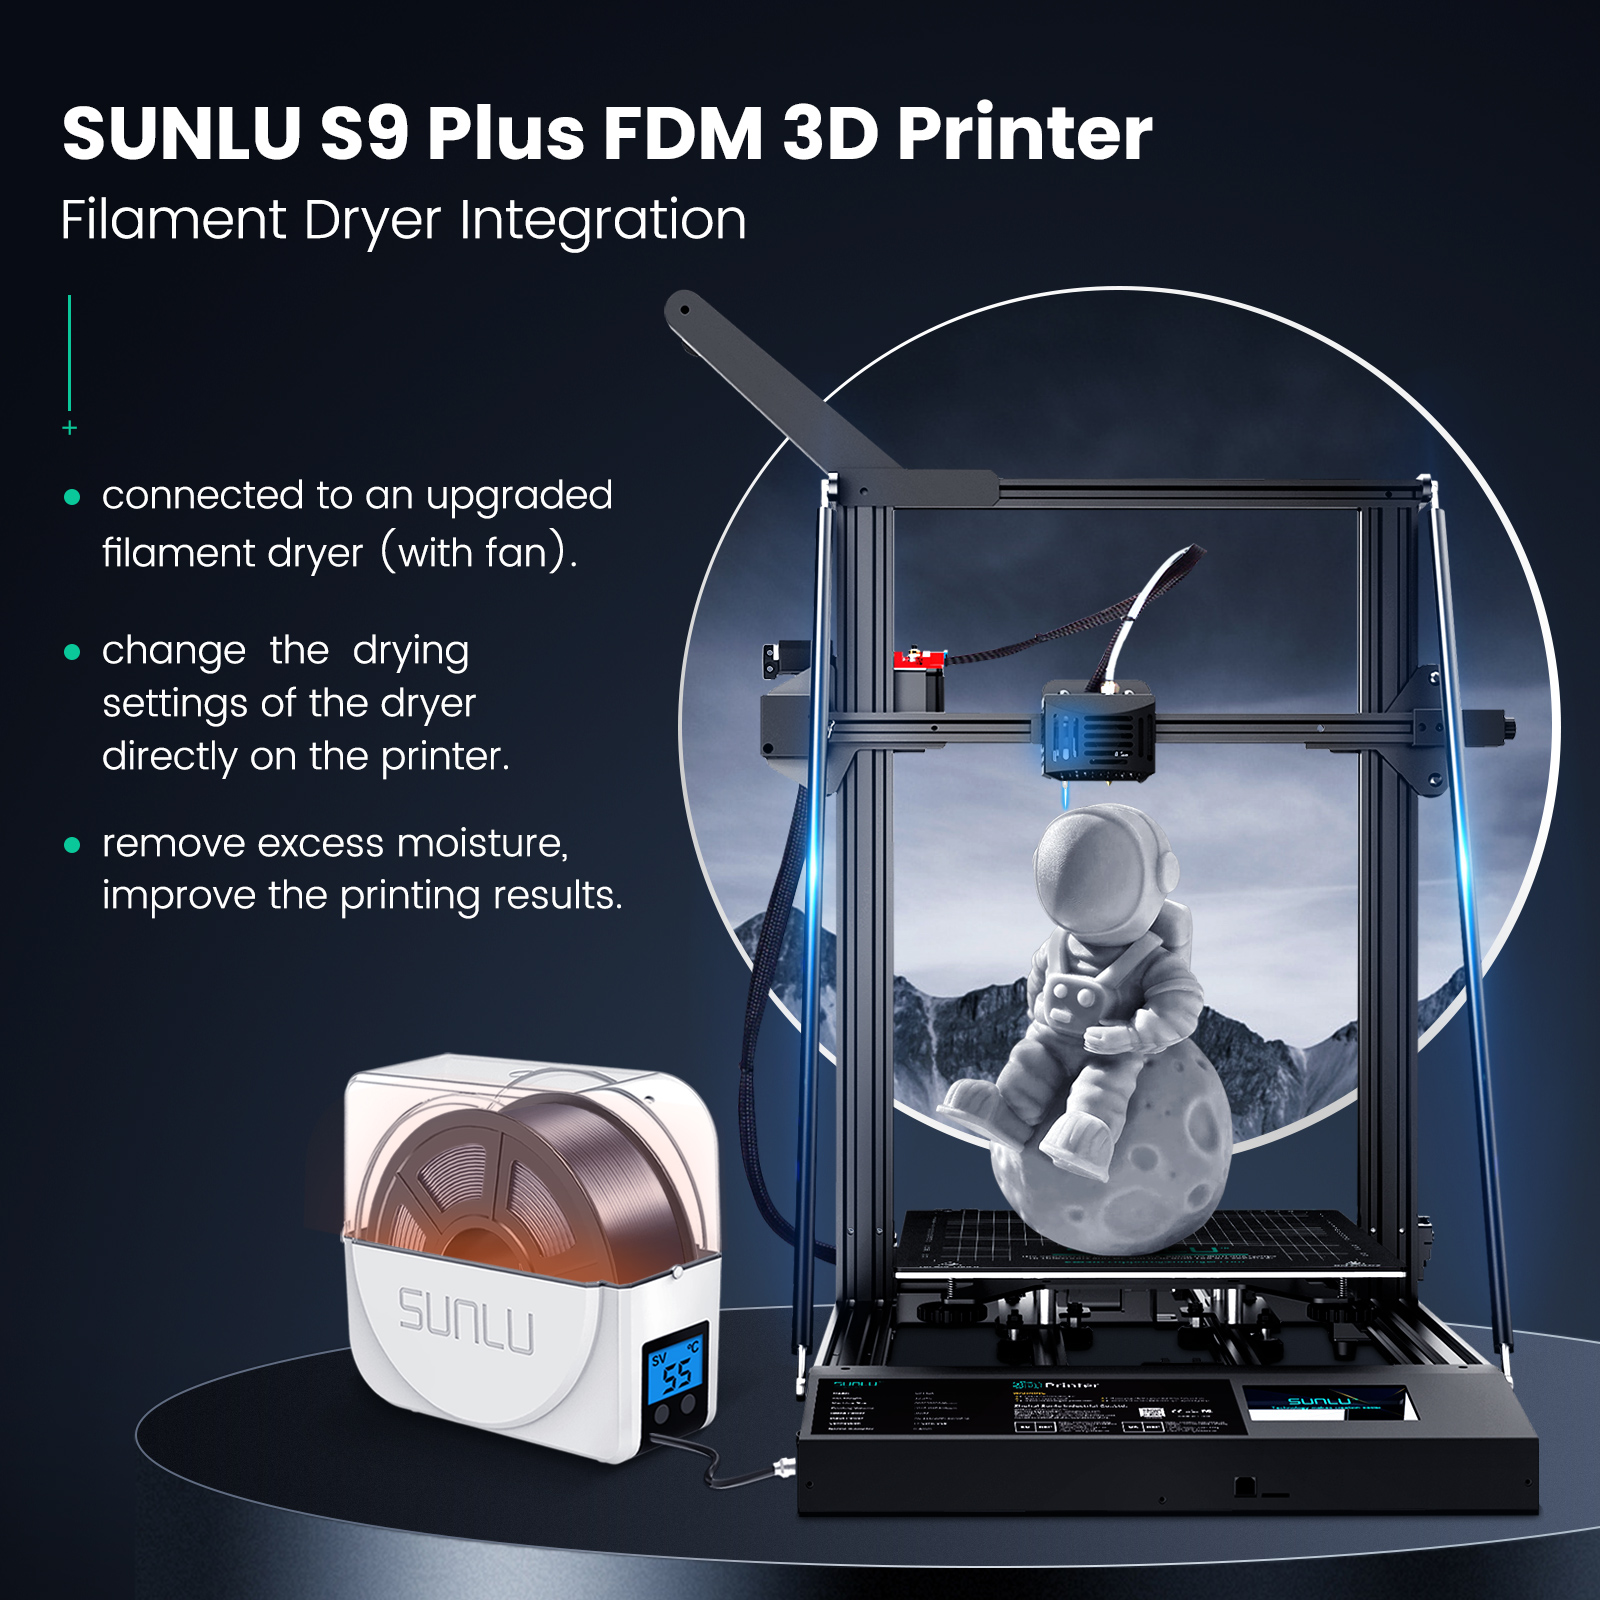 Sunlu-S9-Plus-Large-Size-FDM-3D-Printer-with-FilaDryer-S1-up-to-310310400mm-Printing-Size-Auto-level-1973496-7